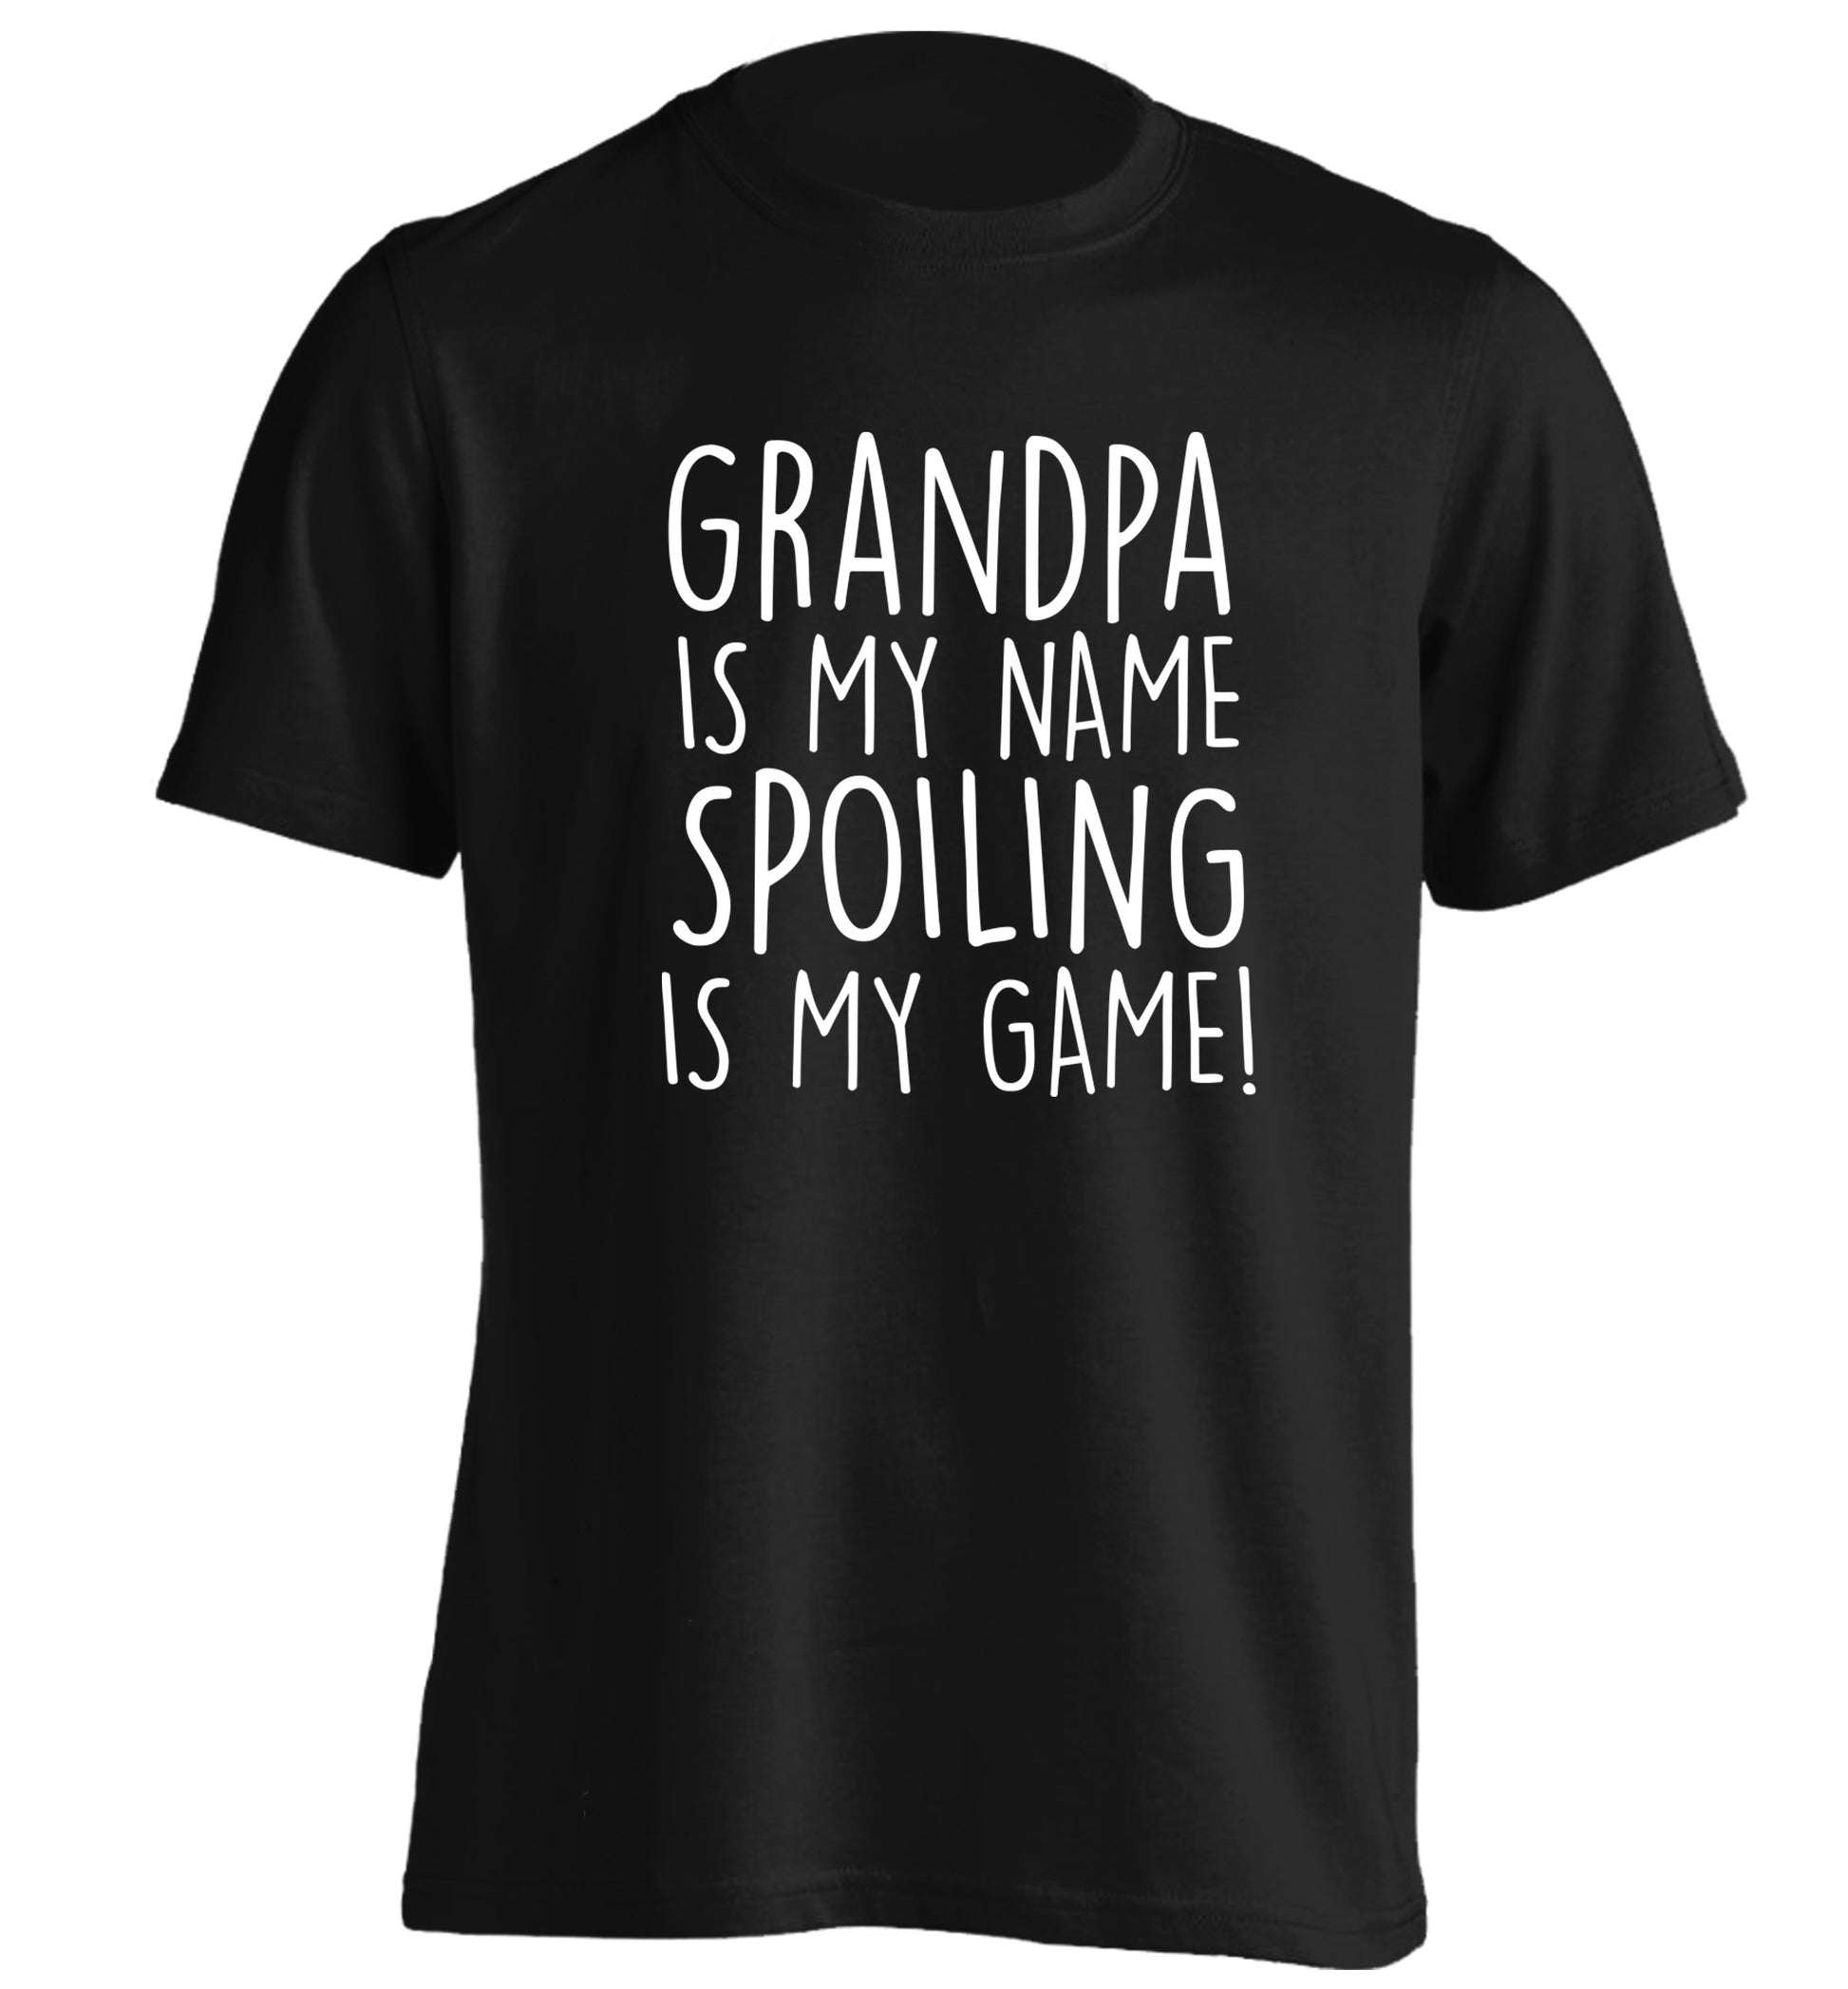 Grandpa is my name, spoiling is my game adults unisex black Tshirt 2XL